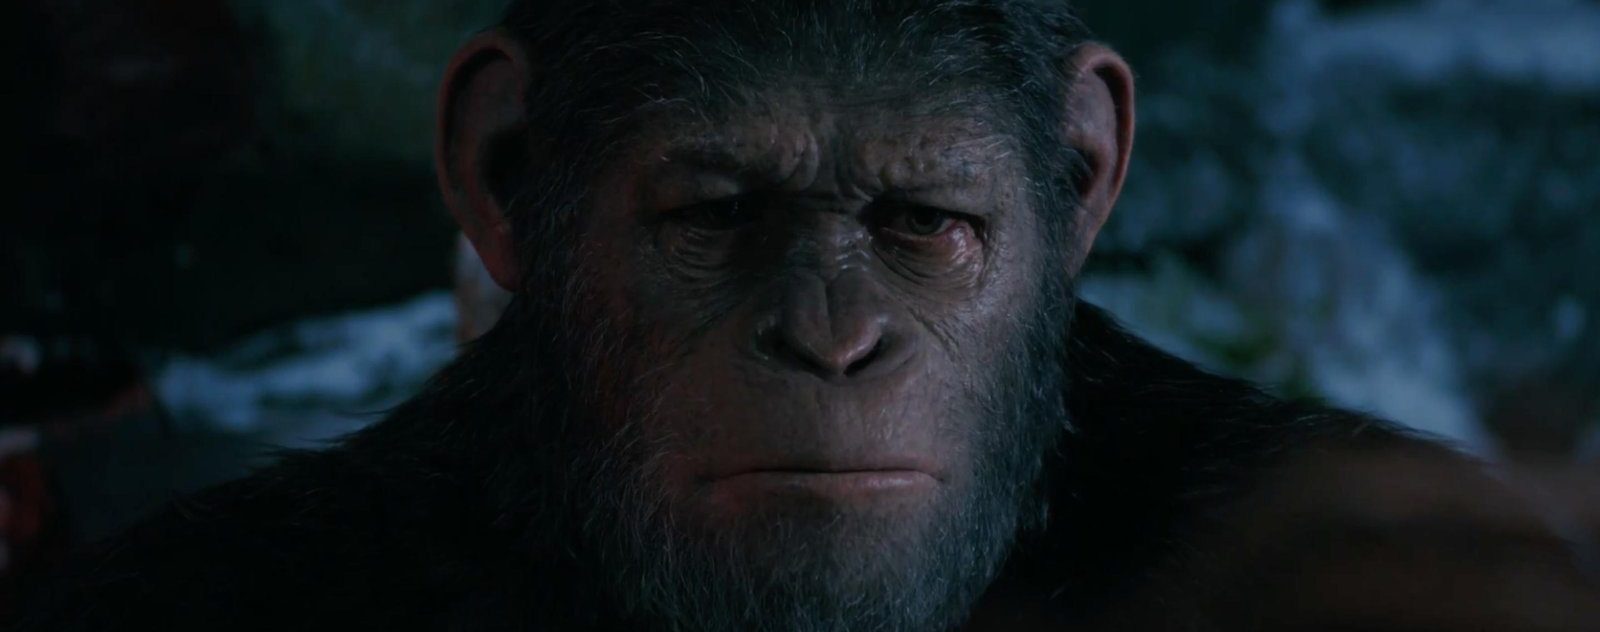 Andy Serkis as Caesar with a sad look on his face